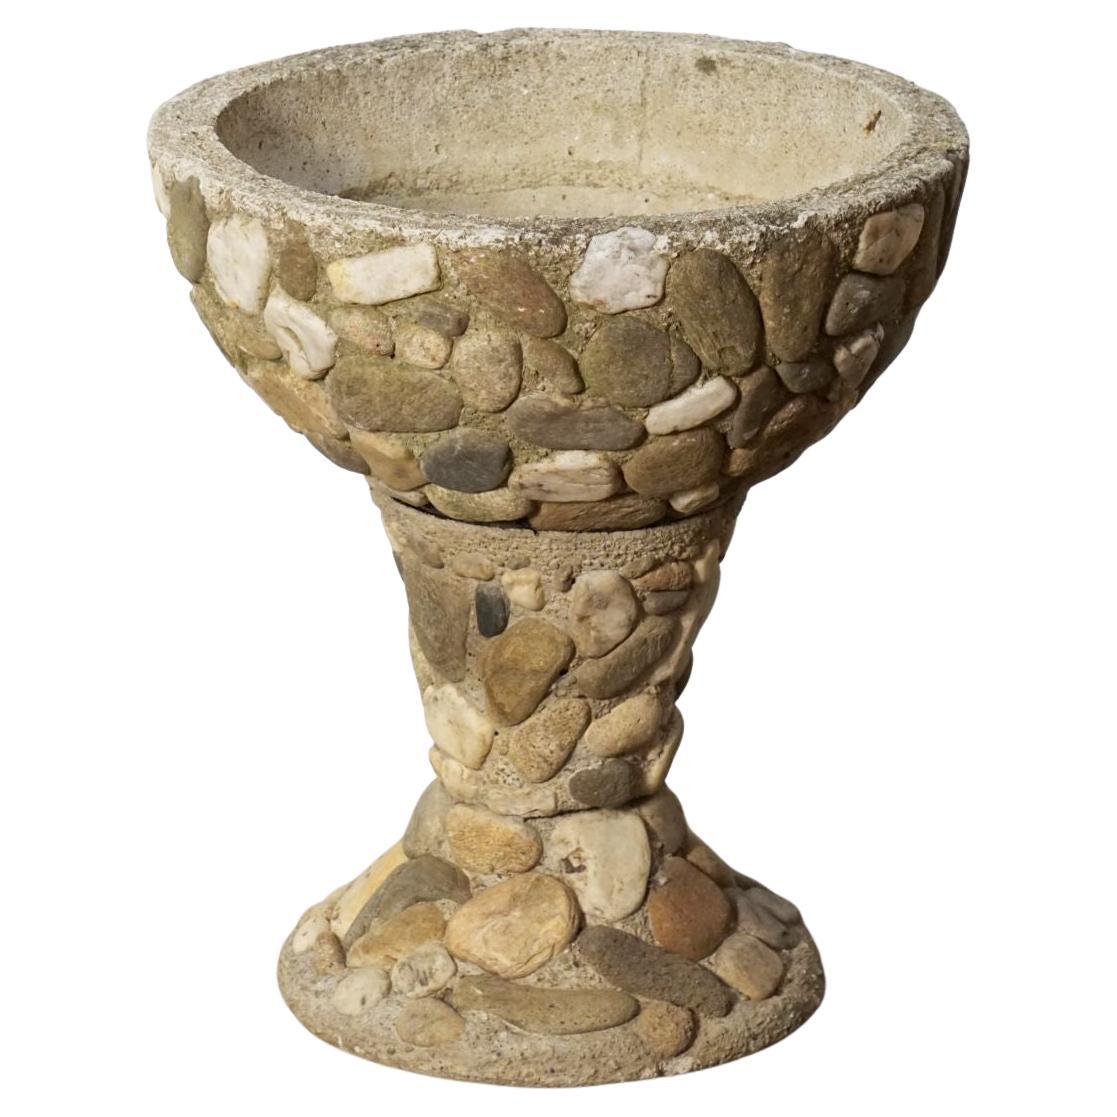 Raised Pebble-Pot Garden Planter or Urn with Embedded Stones from France